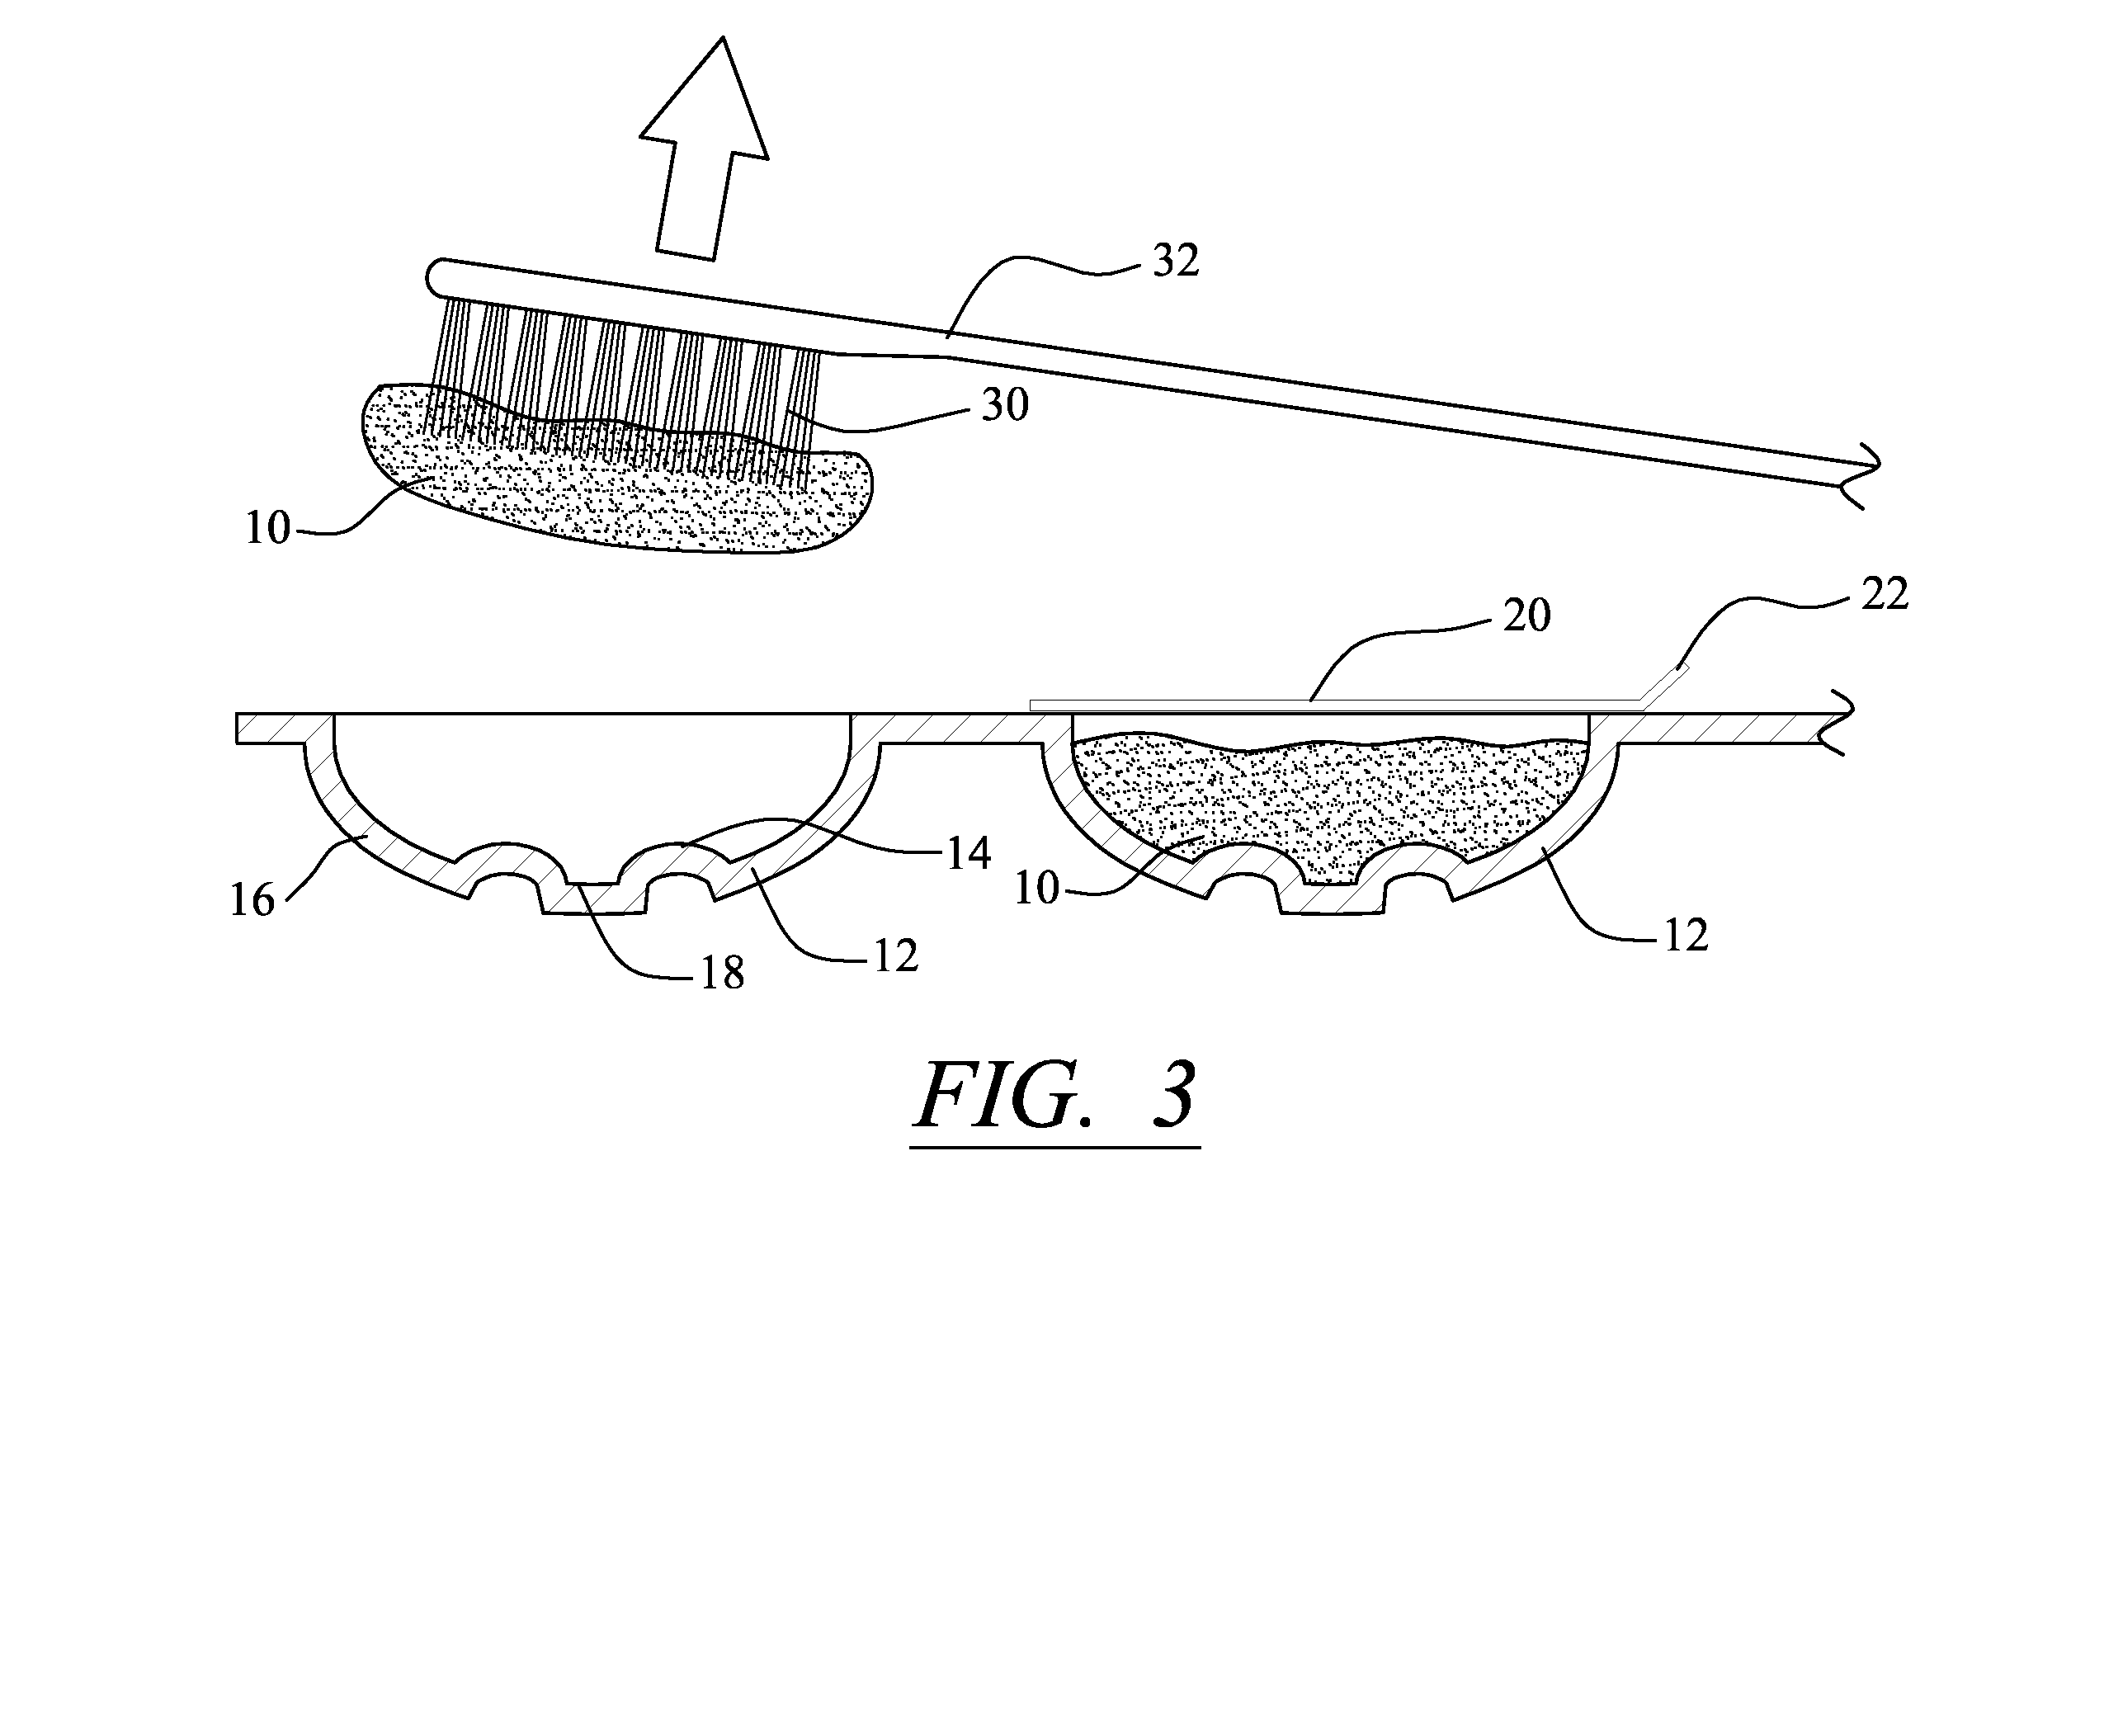 Toothpaste composition and method of applying a single serving of toothpaste to a toothbrush